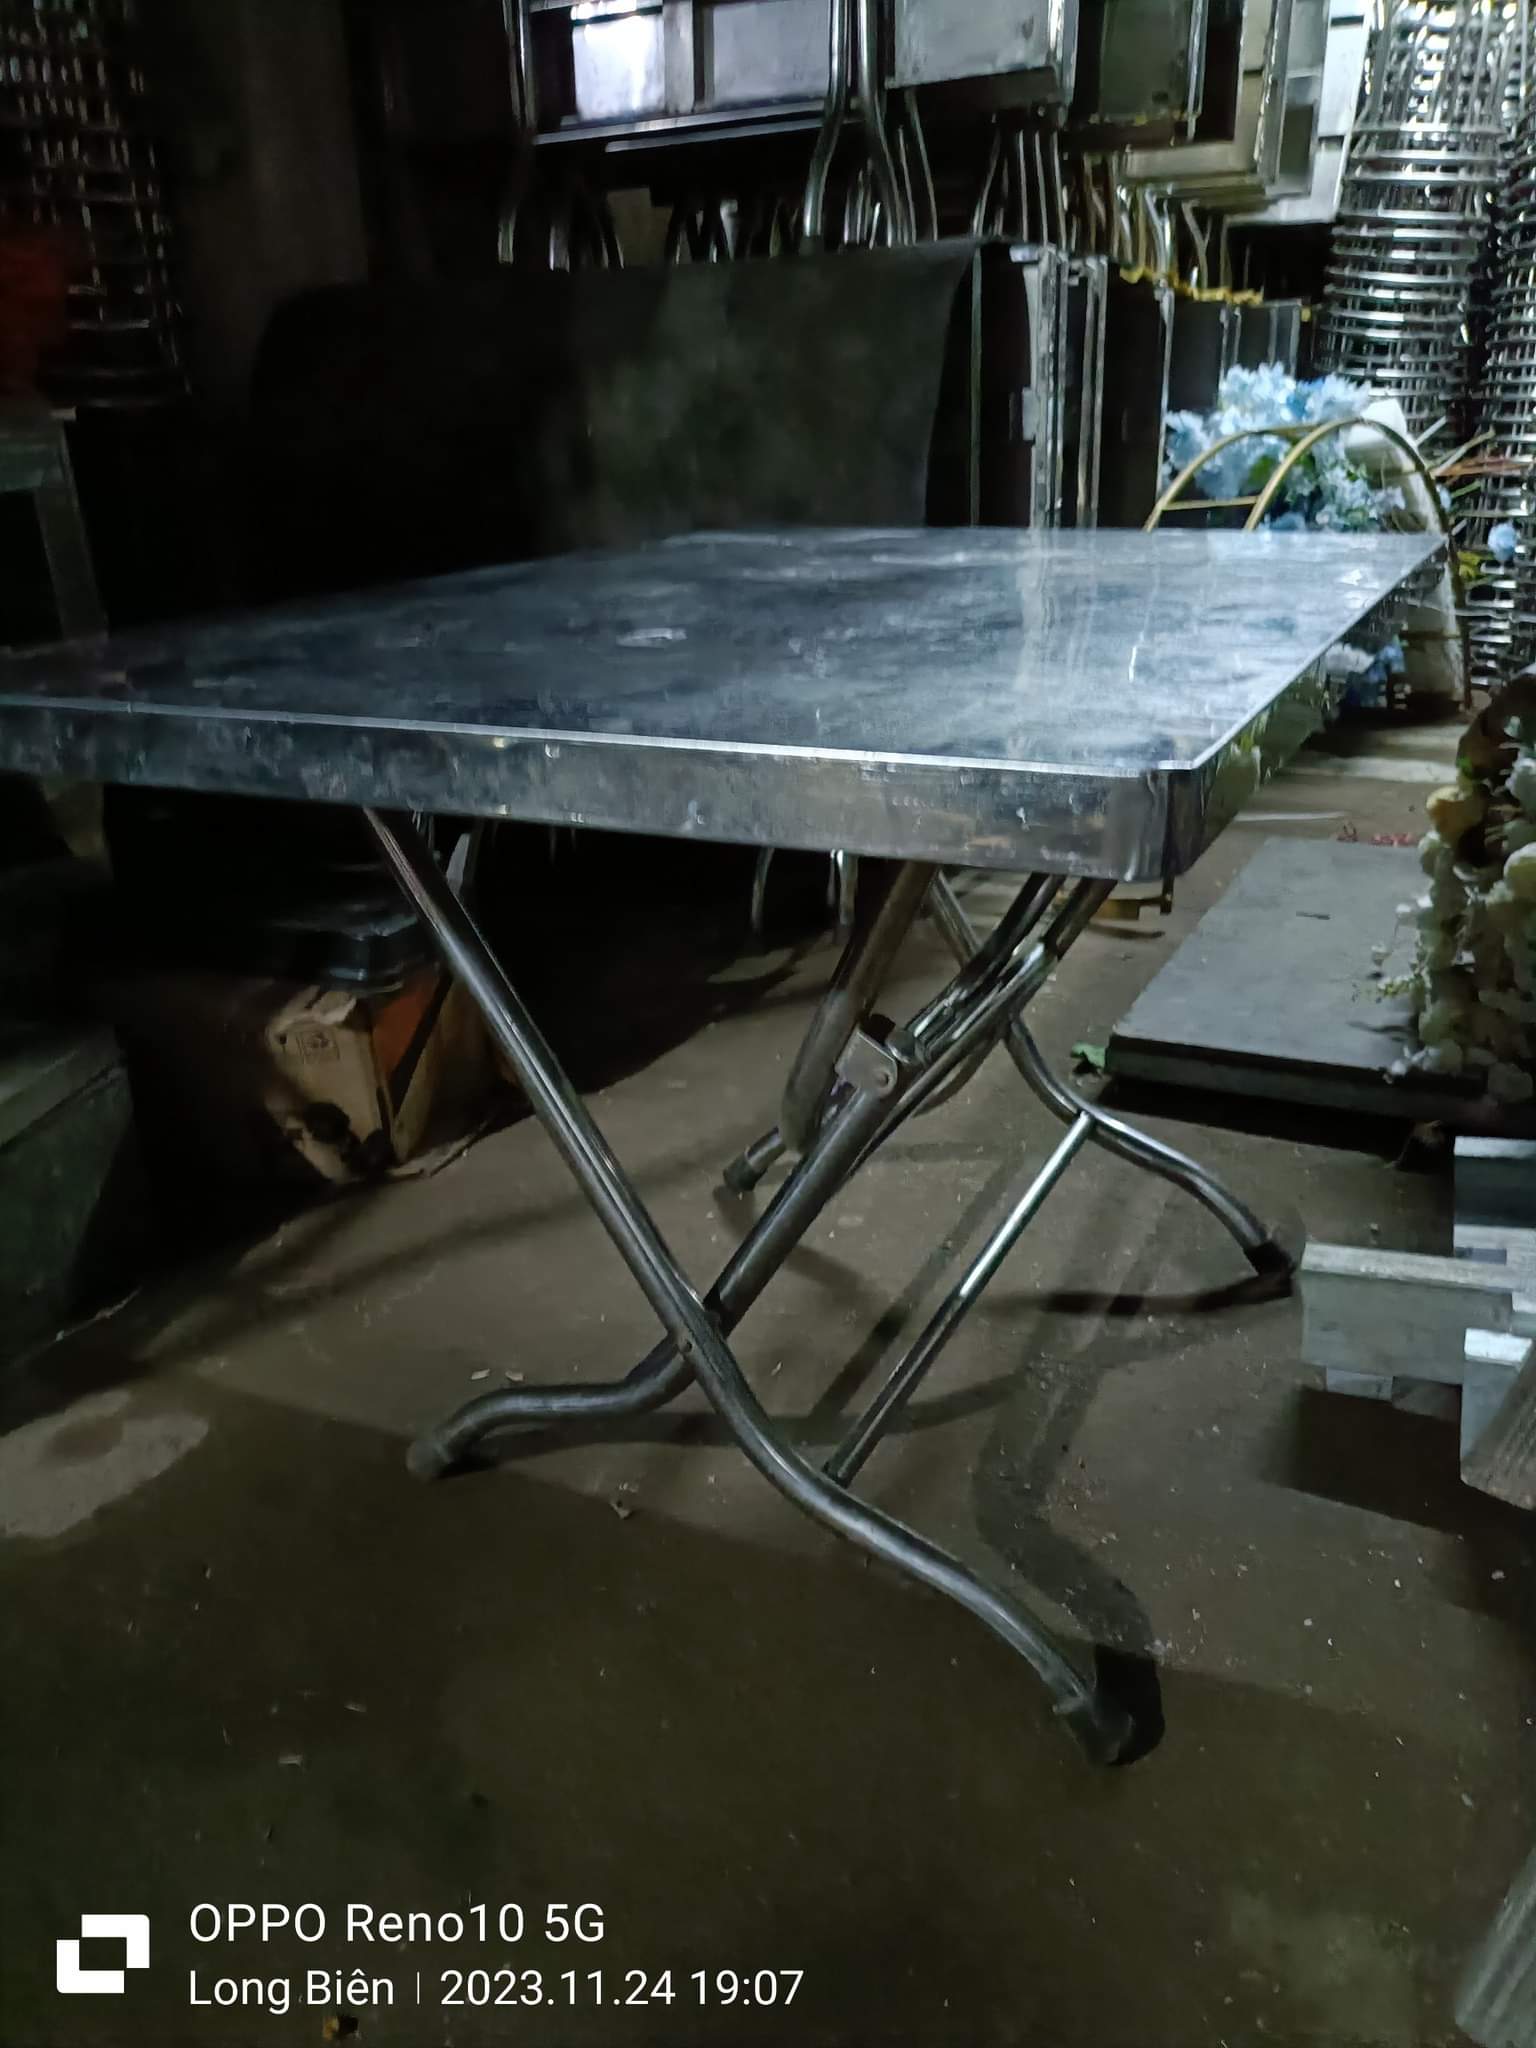 Rental of tables and chairs/ stools